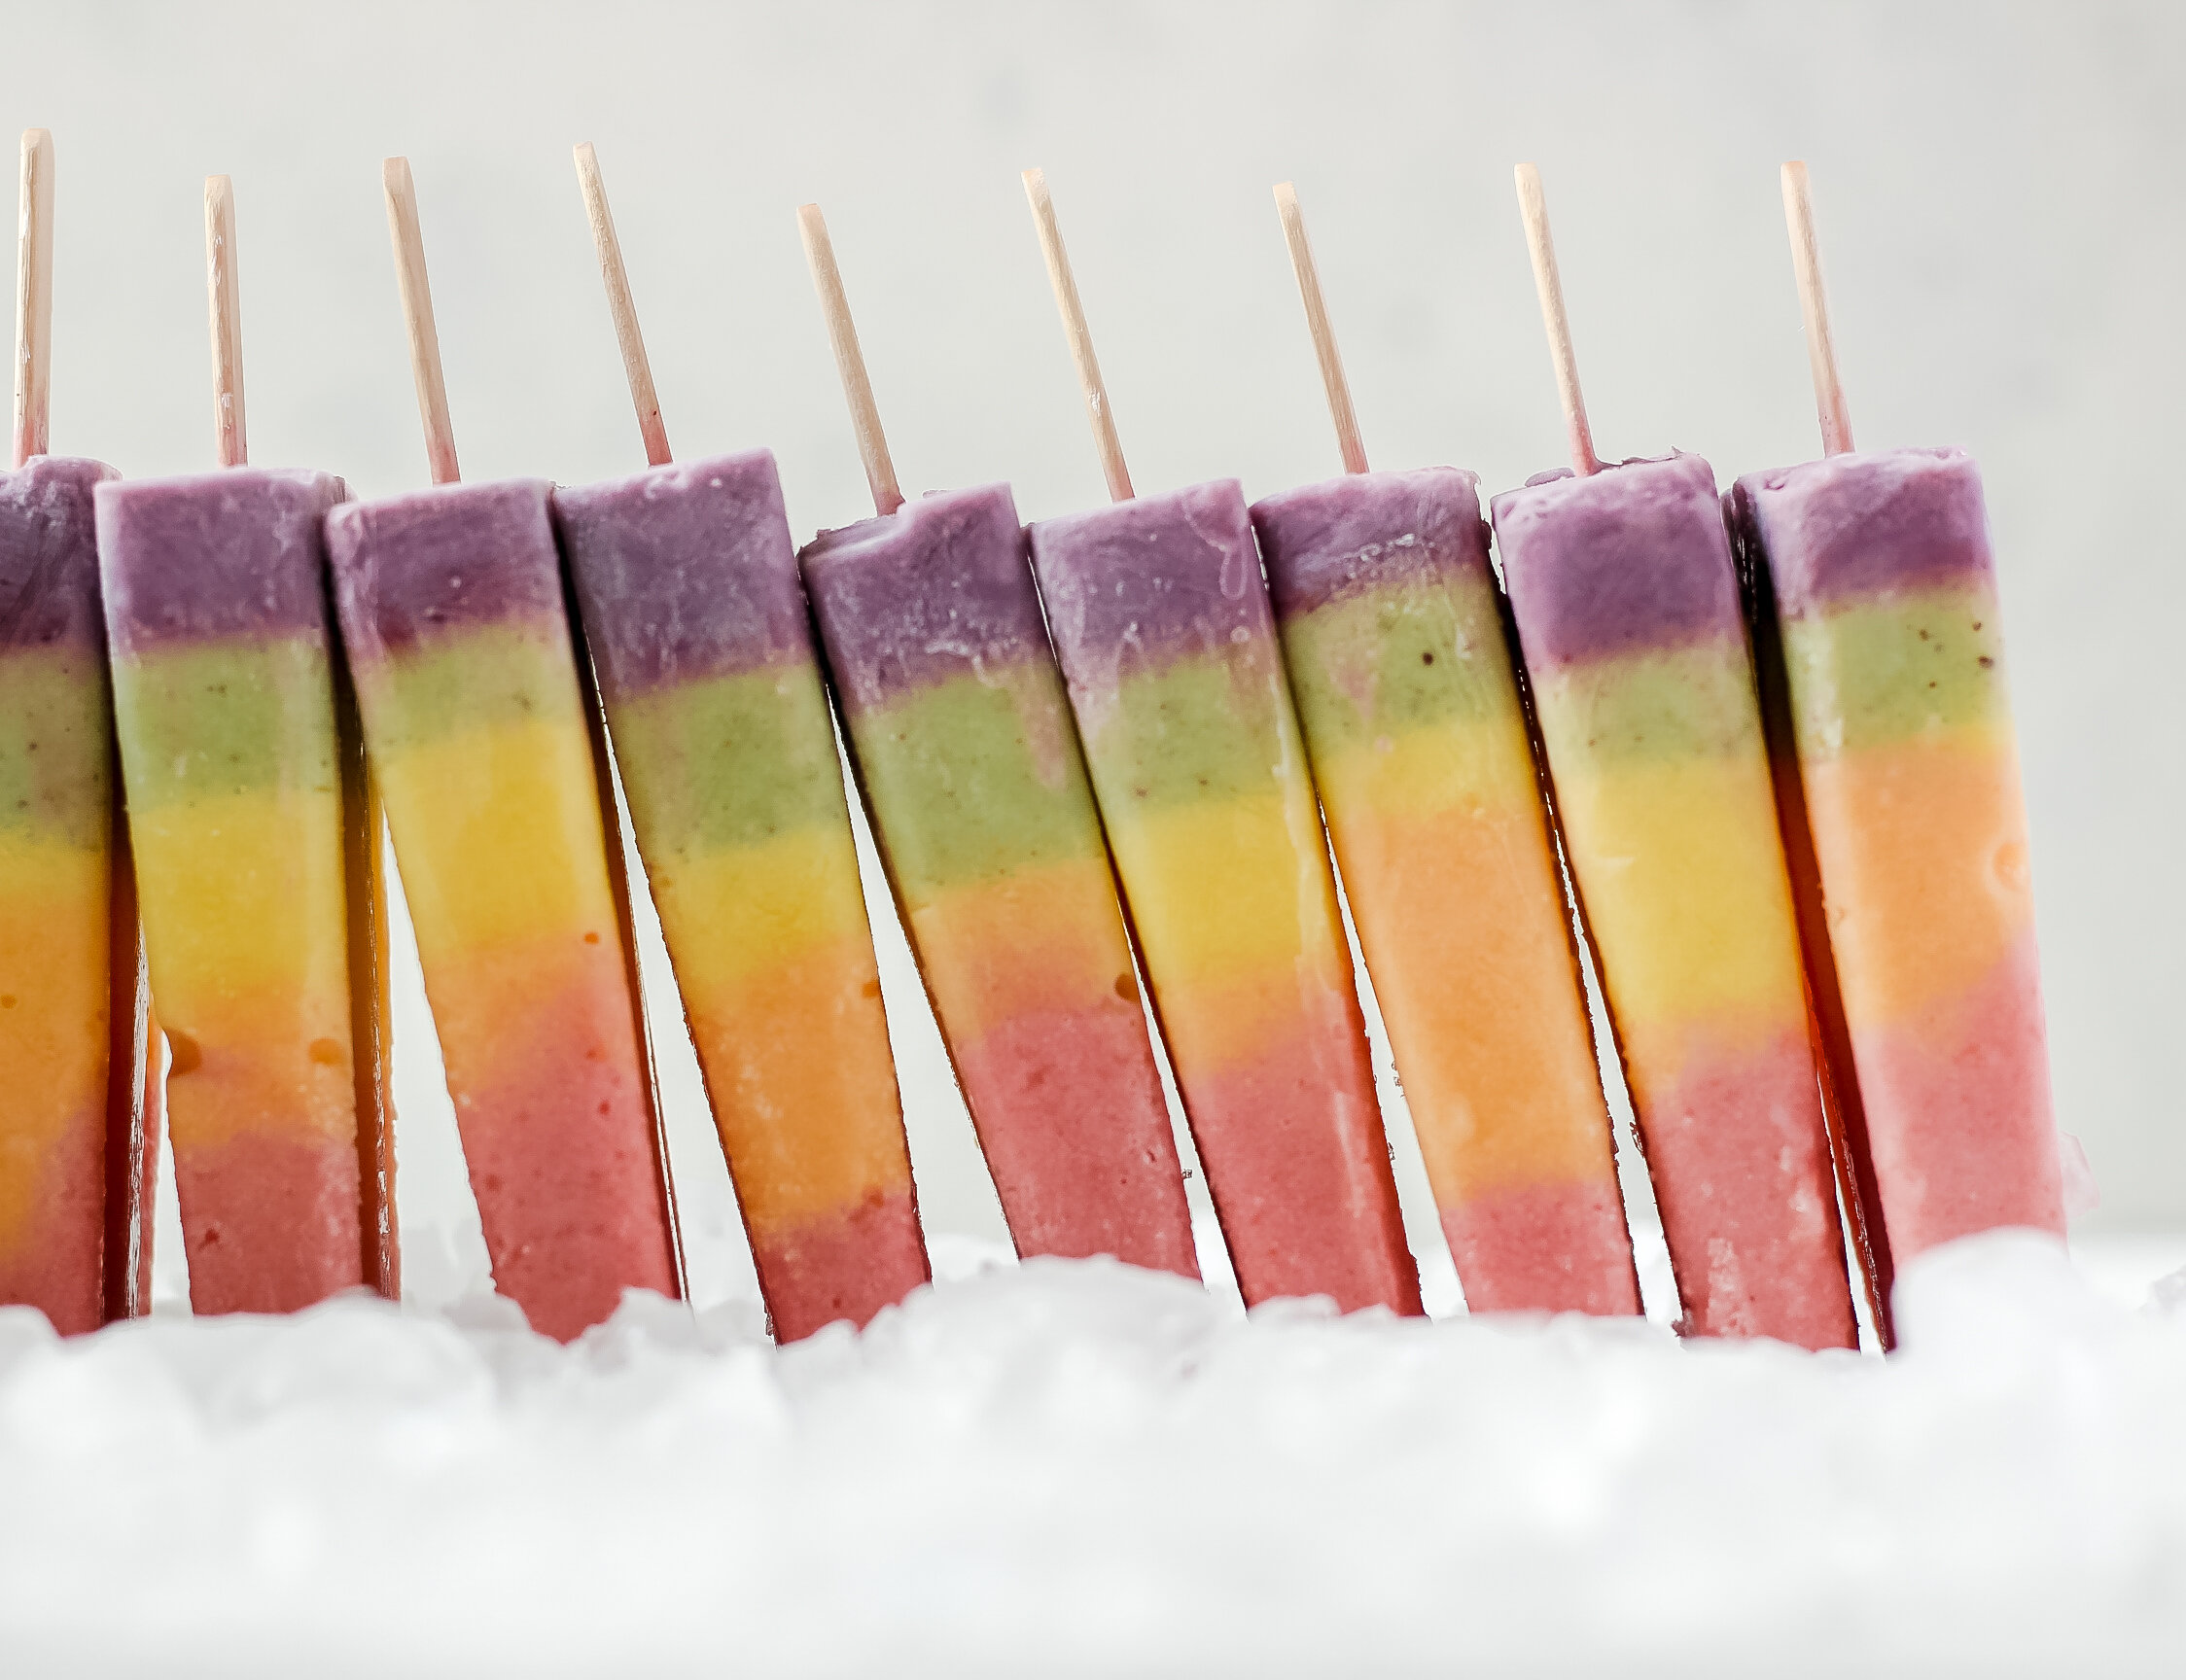 Best Fresh Fruit Rainbow Popsicle · The Typical Mom